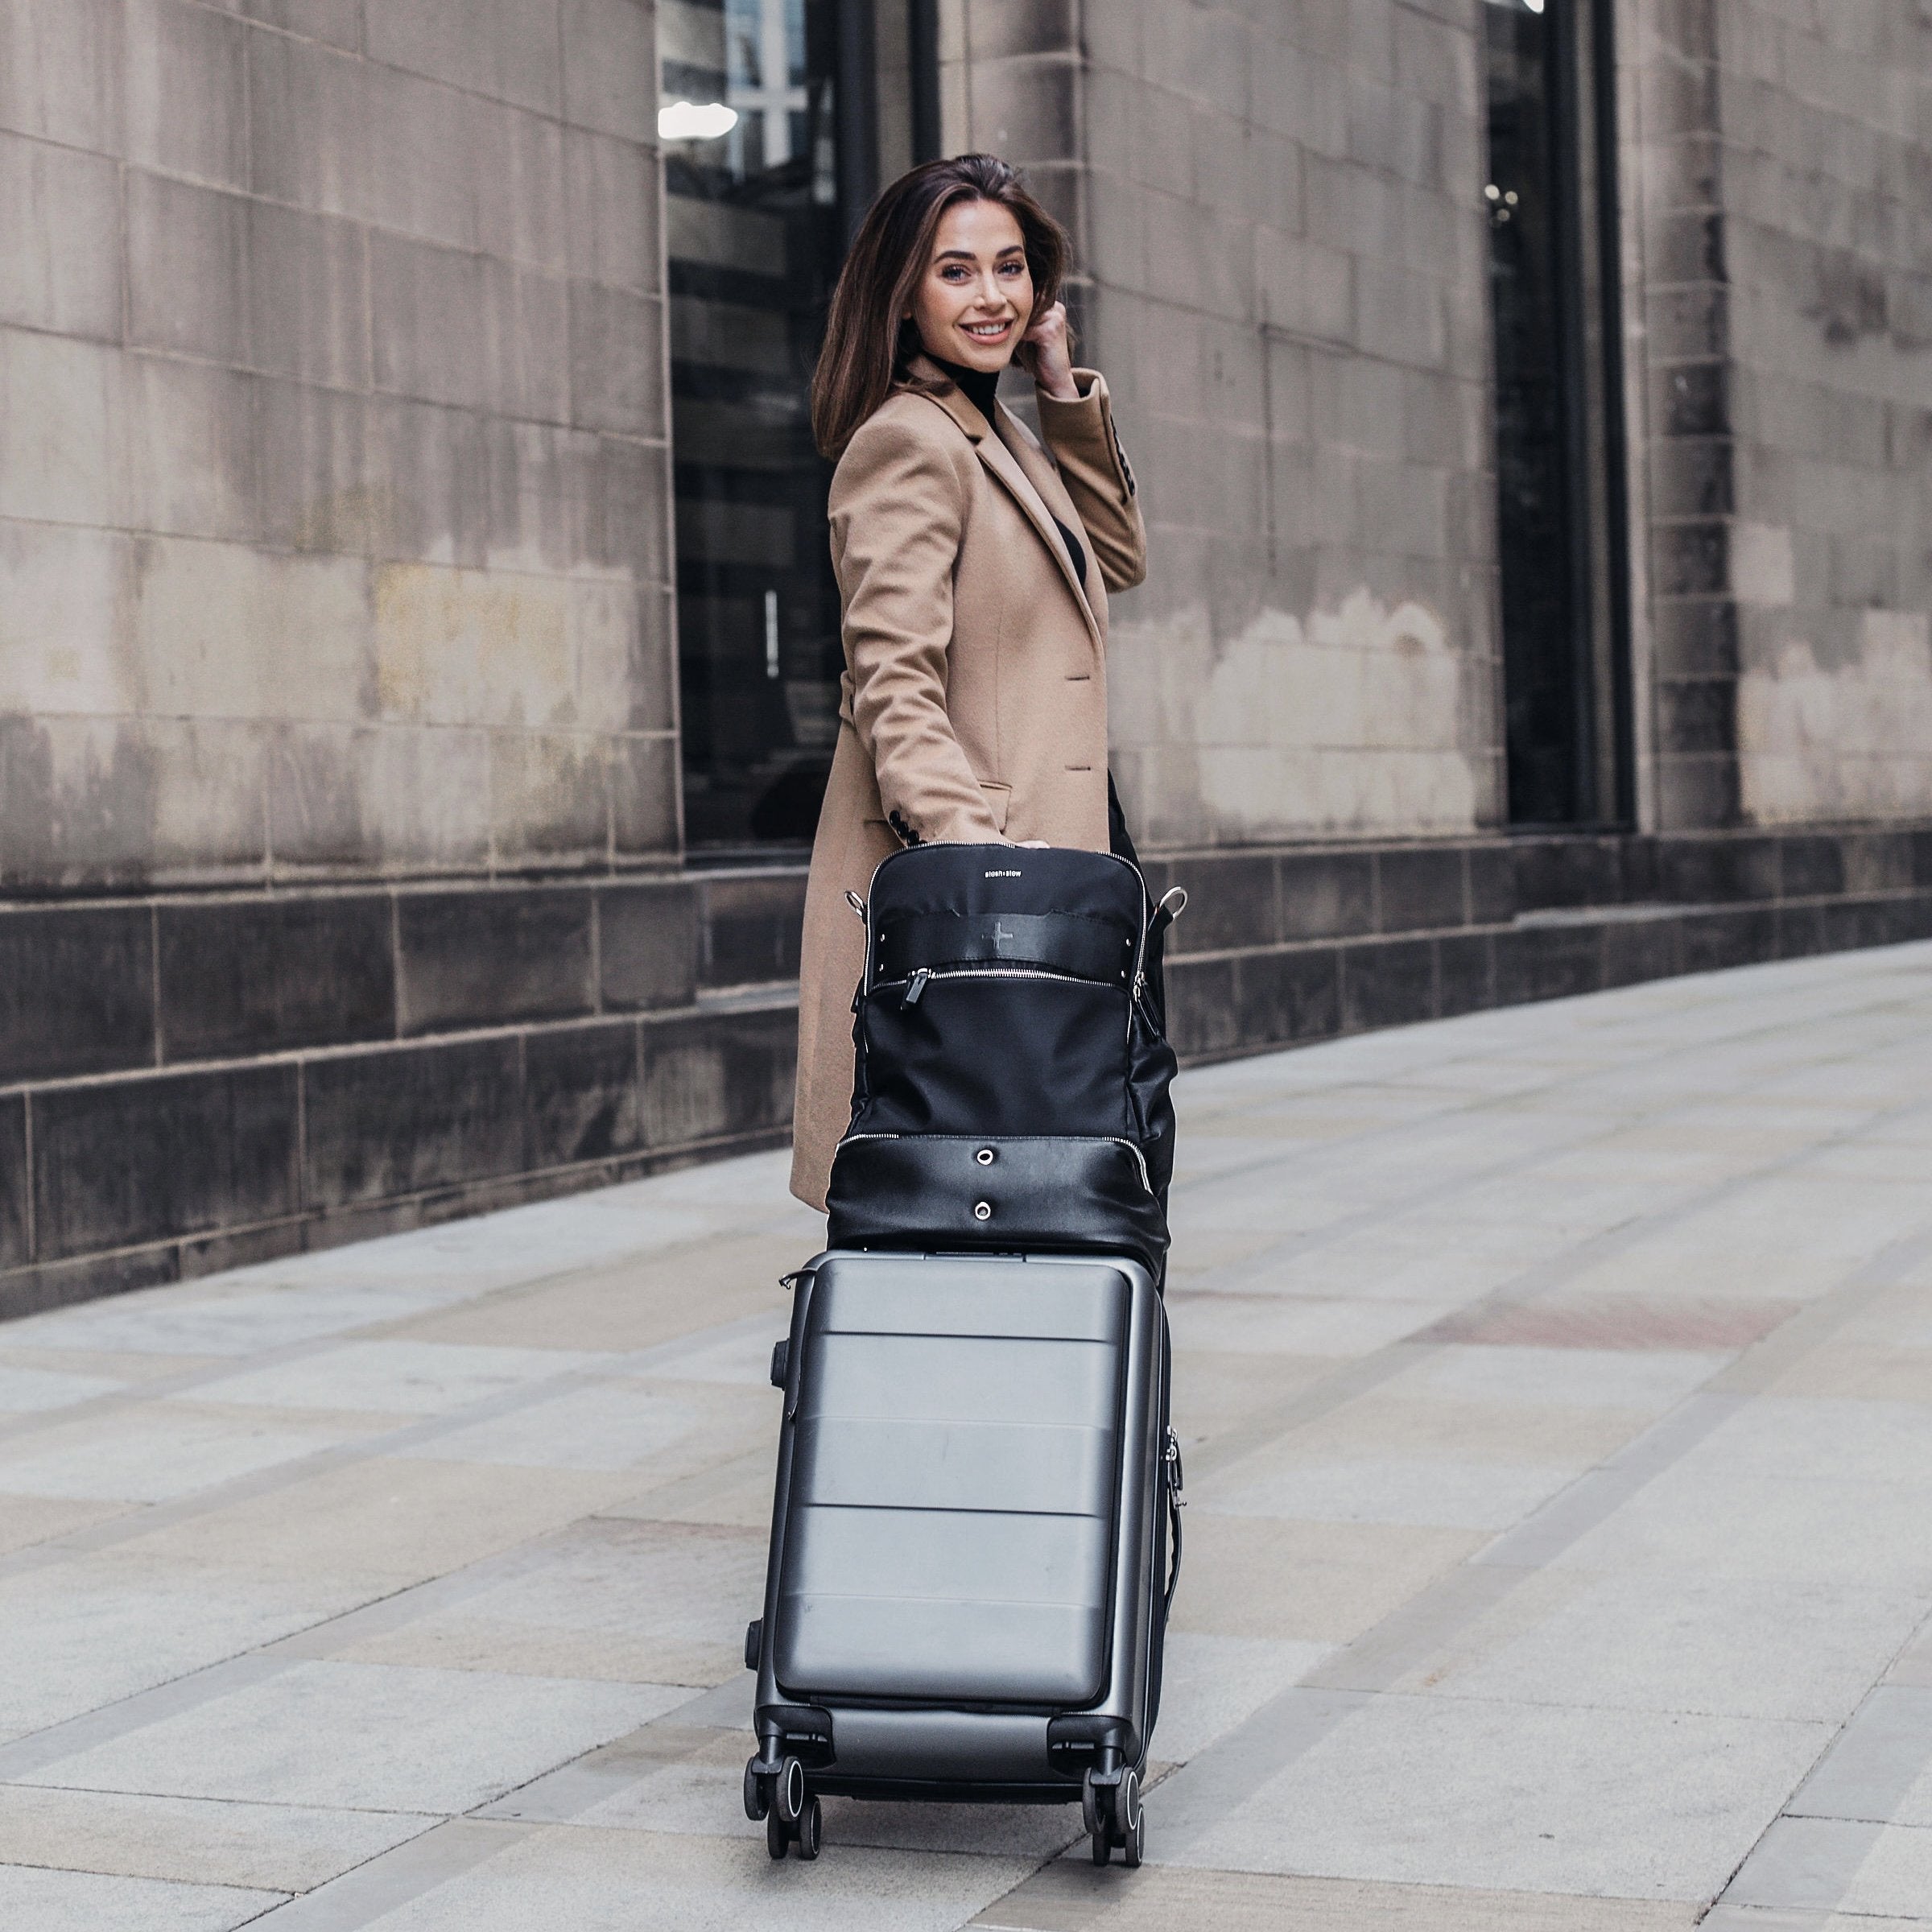 stylish backpack for women with suitcase attachment 